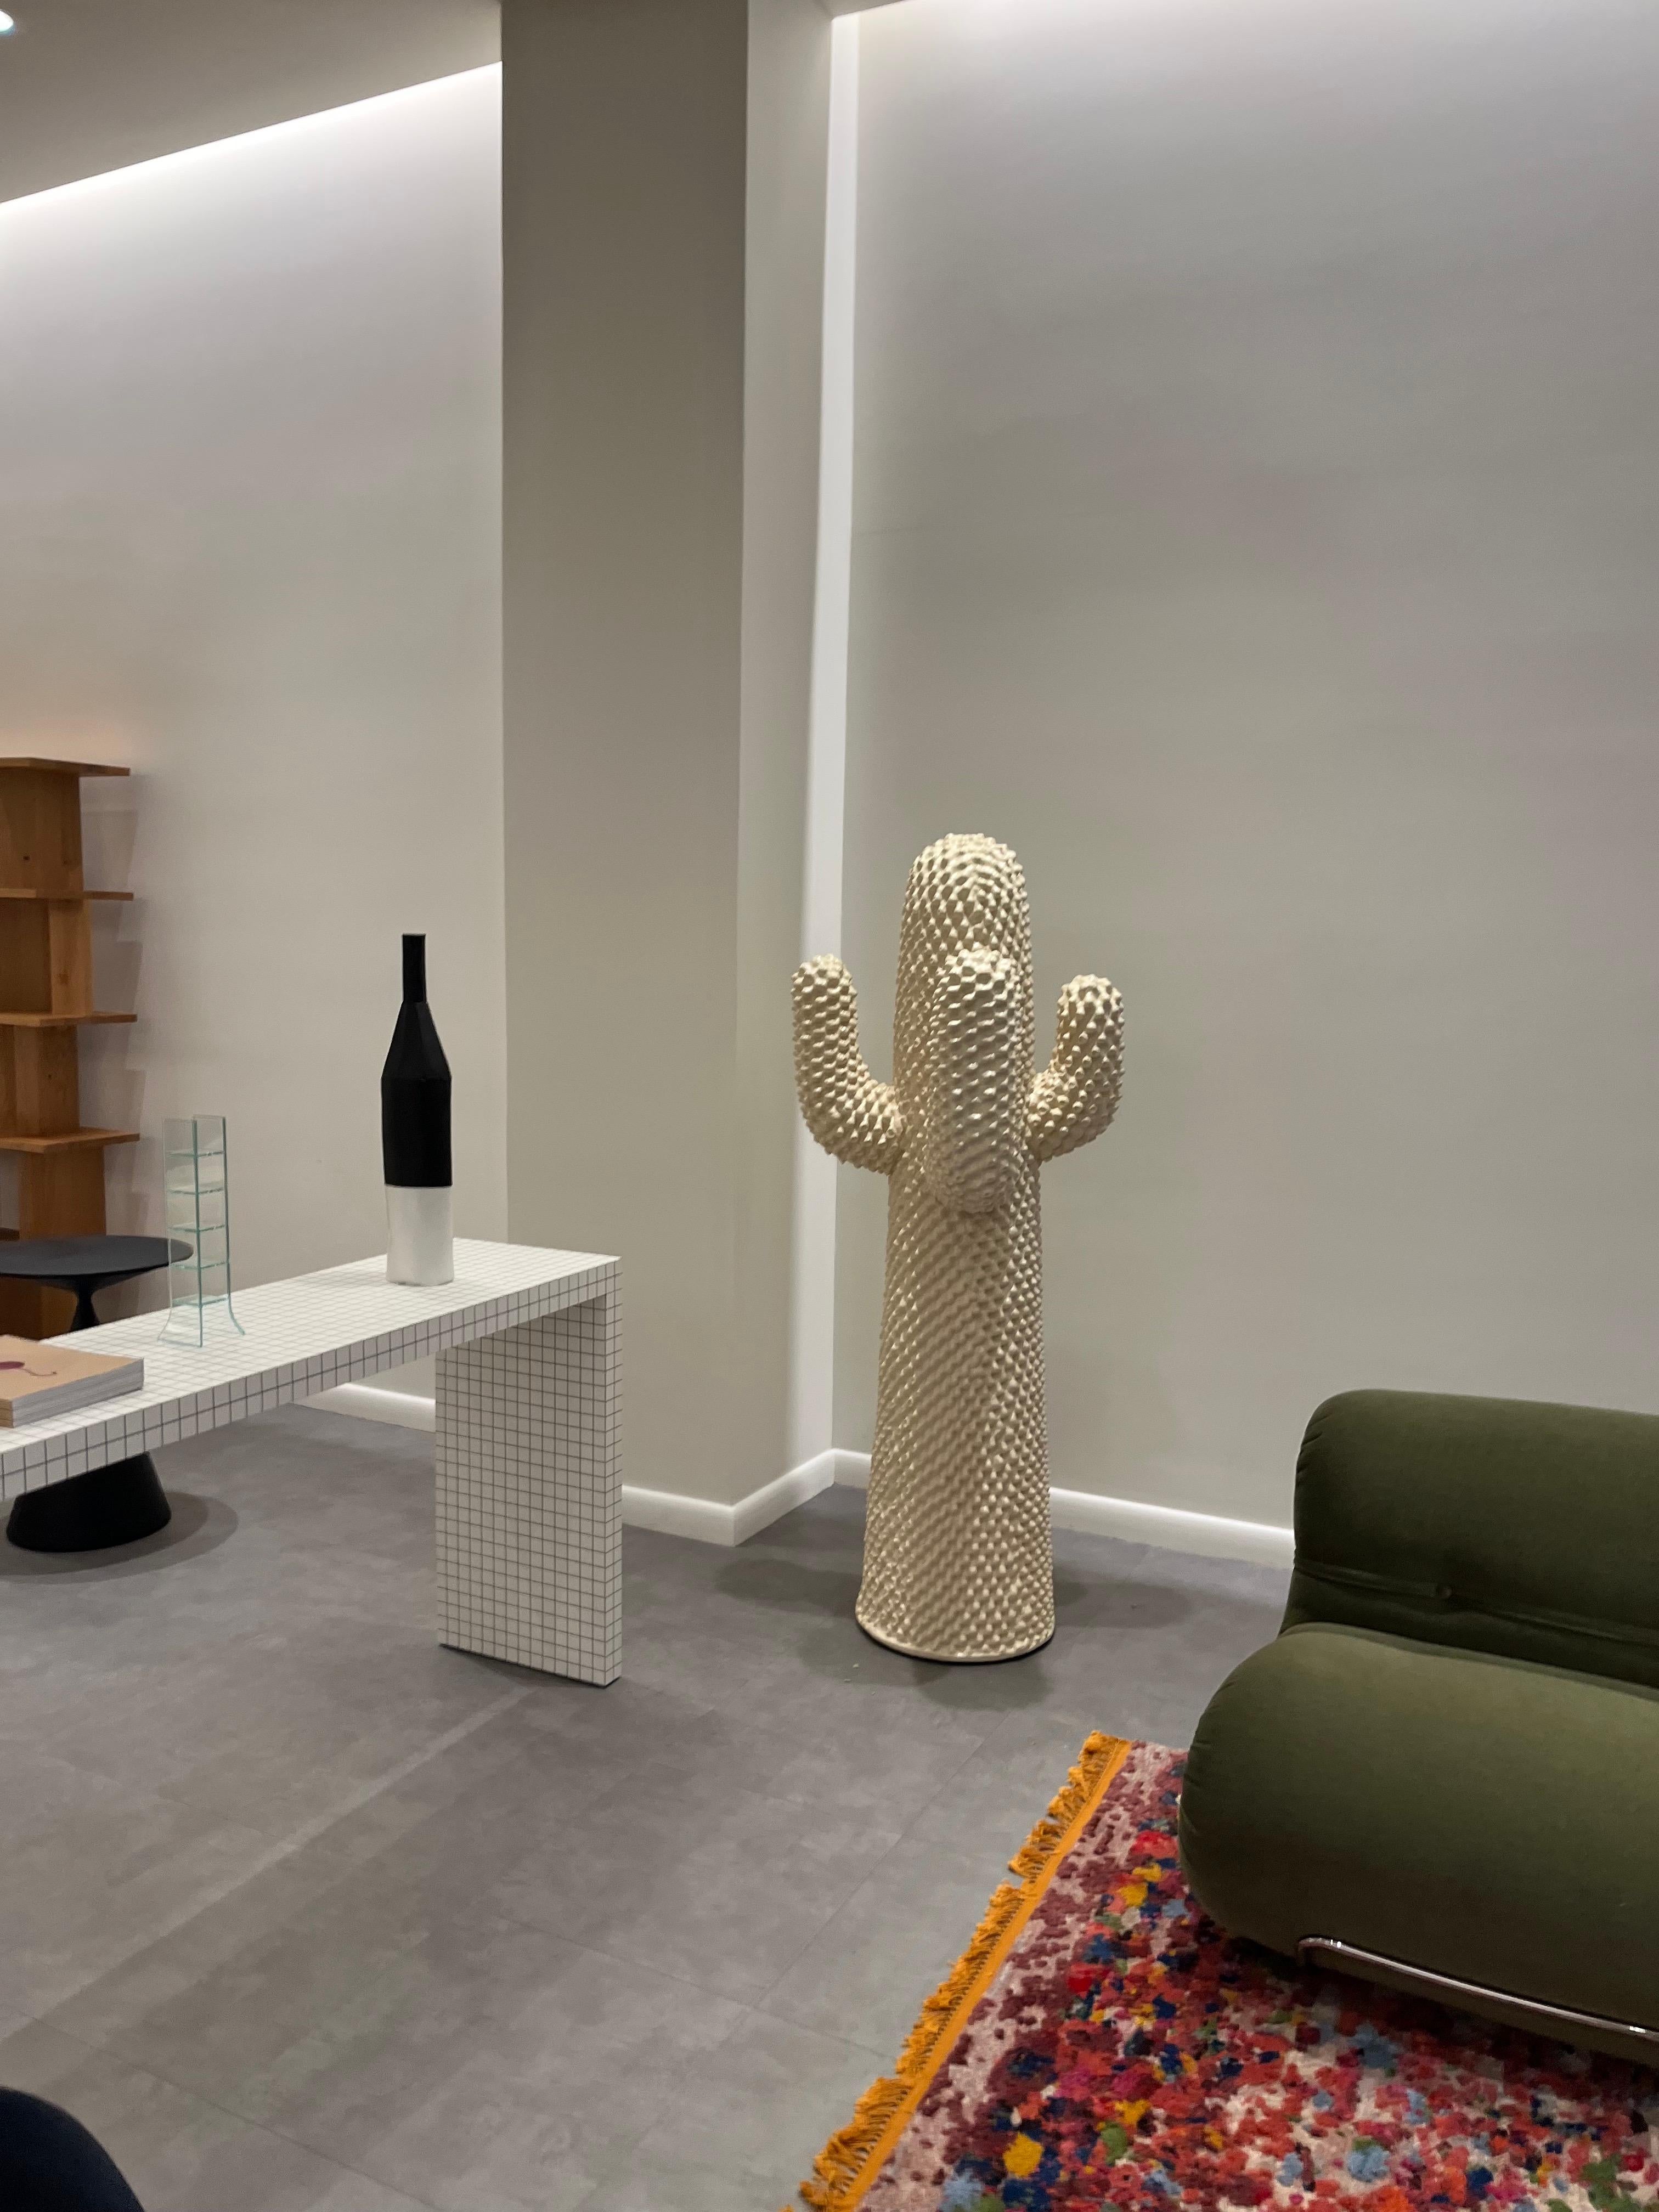 Coat stand of soft polyurethane finished by hand with Guflac
The subject of several, free and often ambiguous interpretations, Cactus is the icon of Italian design that has revolutionized the domestic landscape, by subverting the borders between